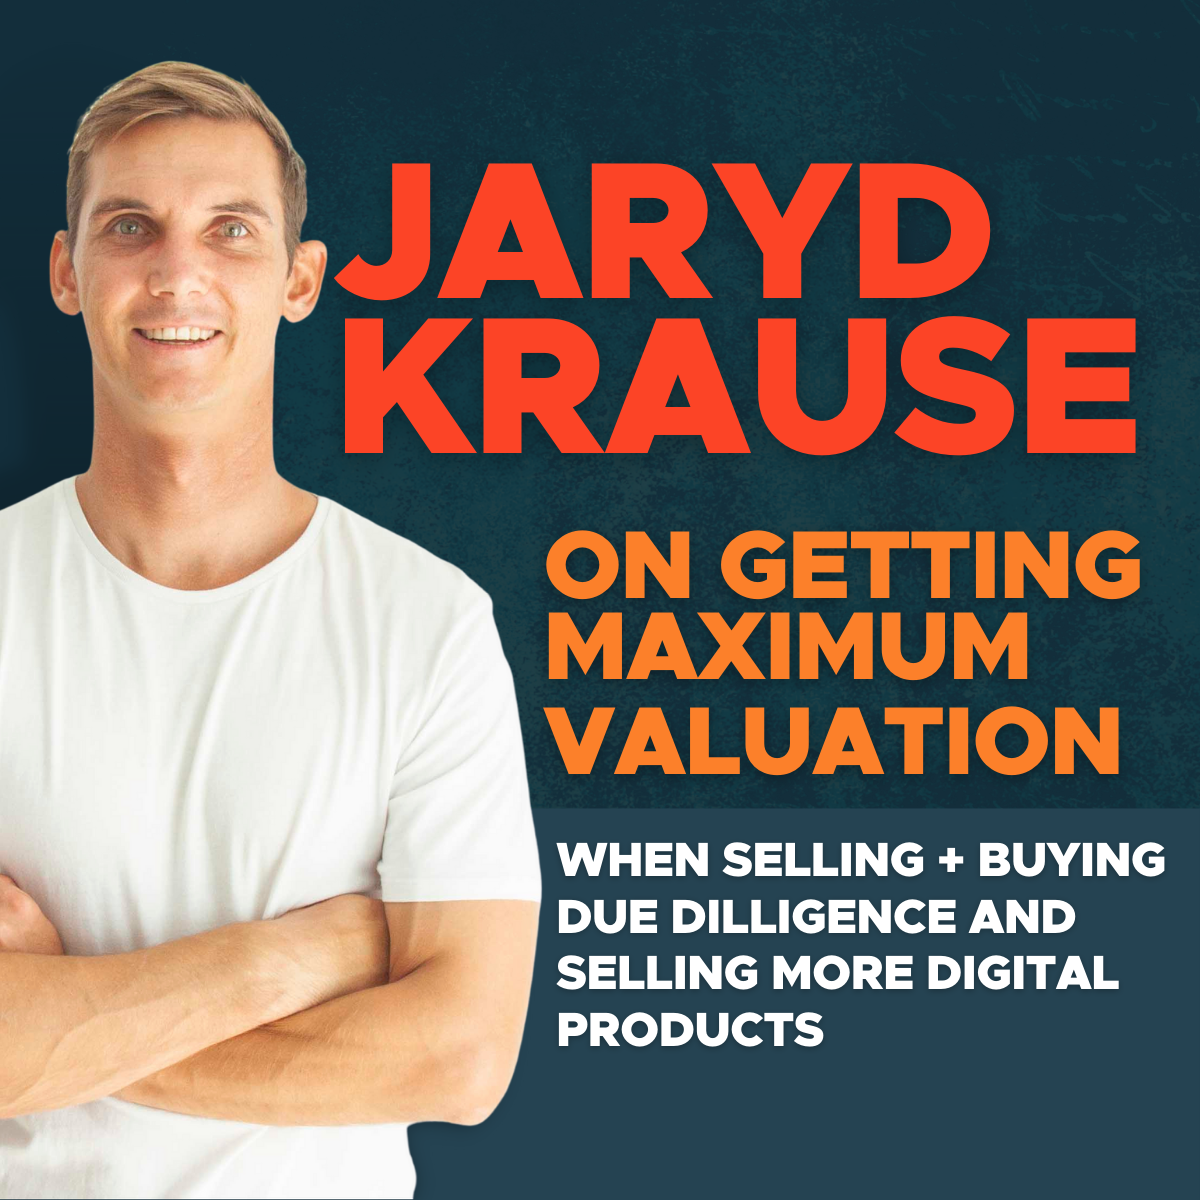 Jaryd Krause on getting maximum valuation when selling + buying due diligence and selling more digital products